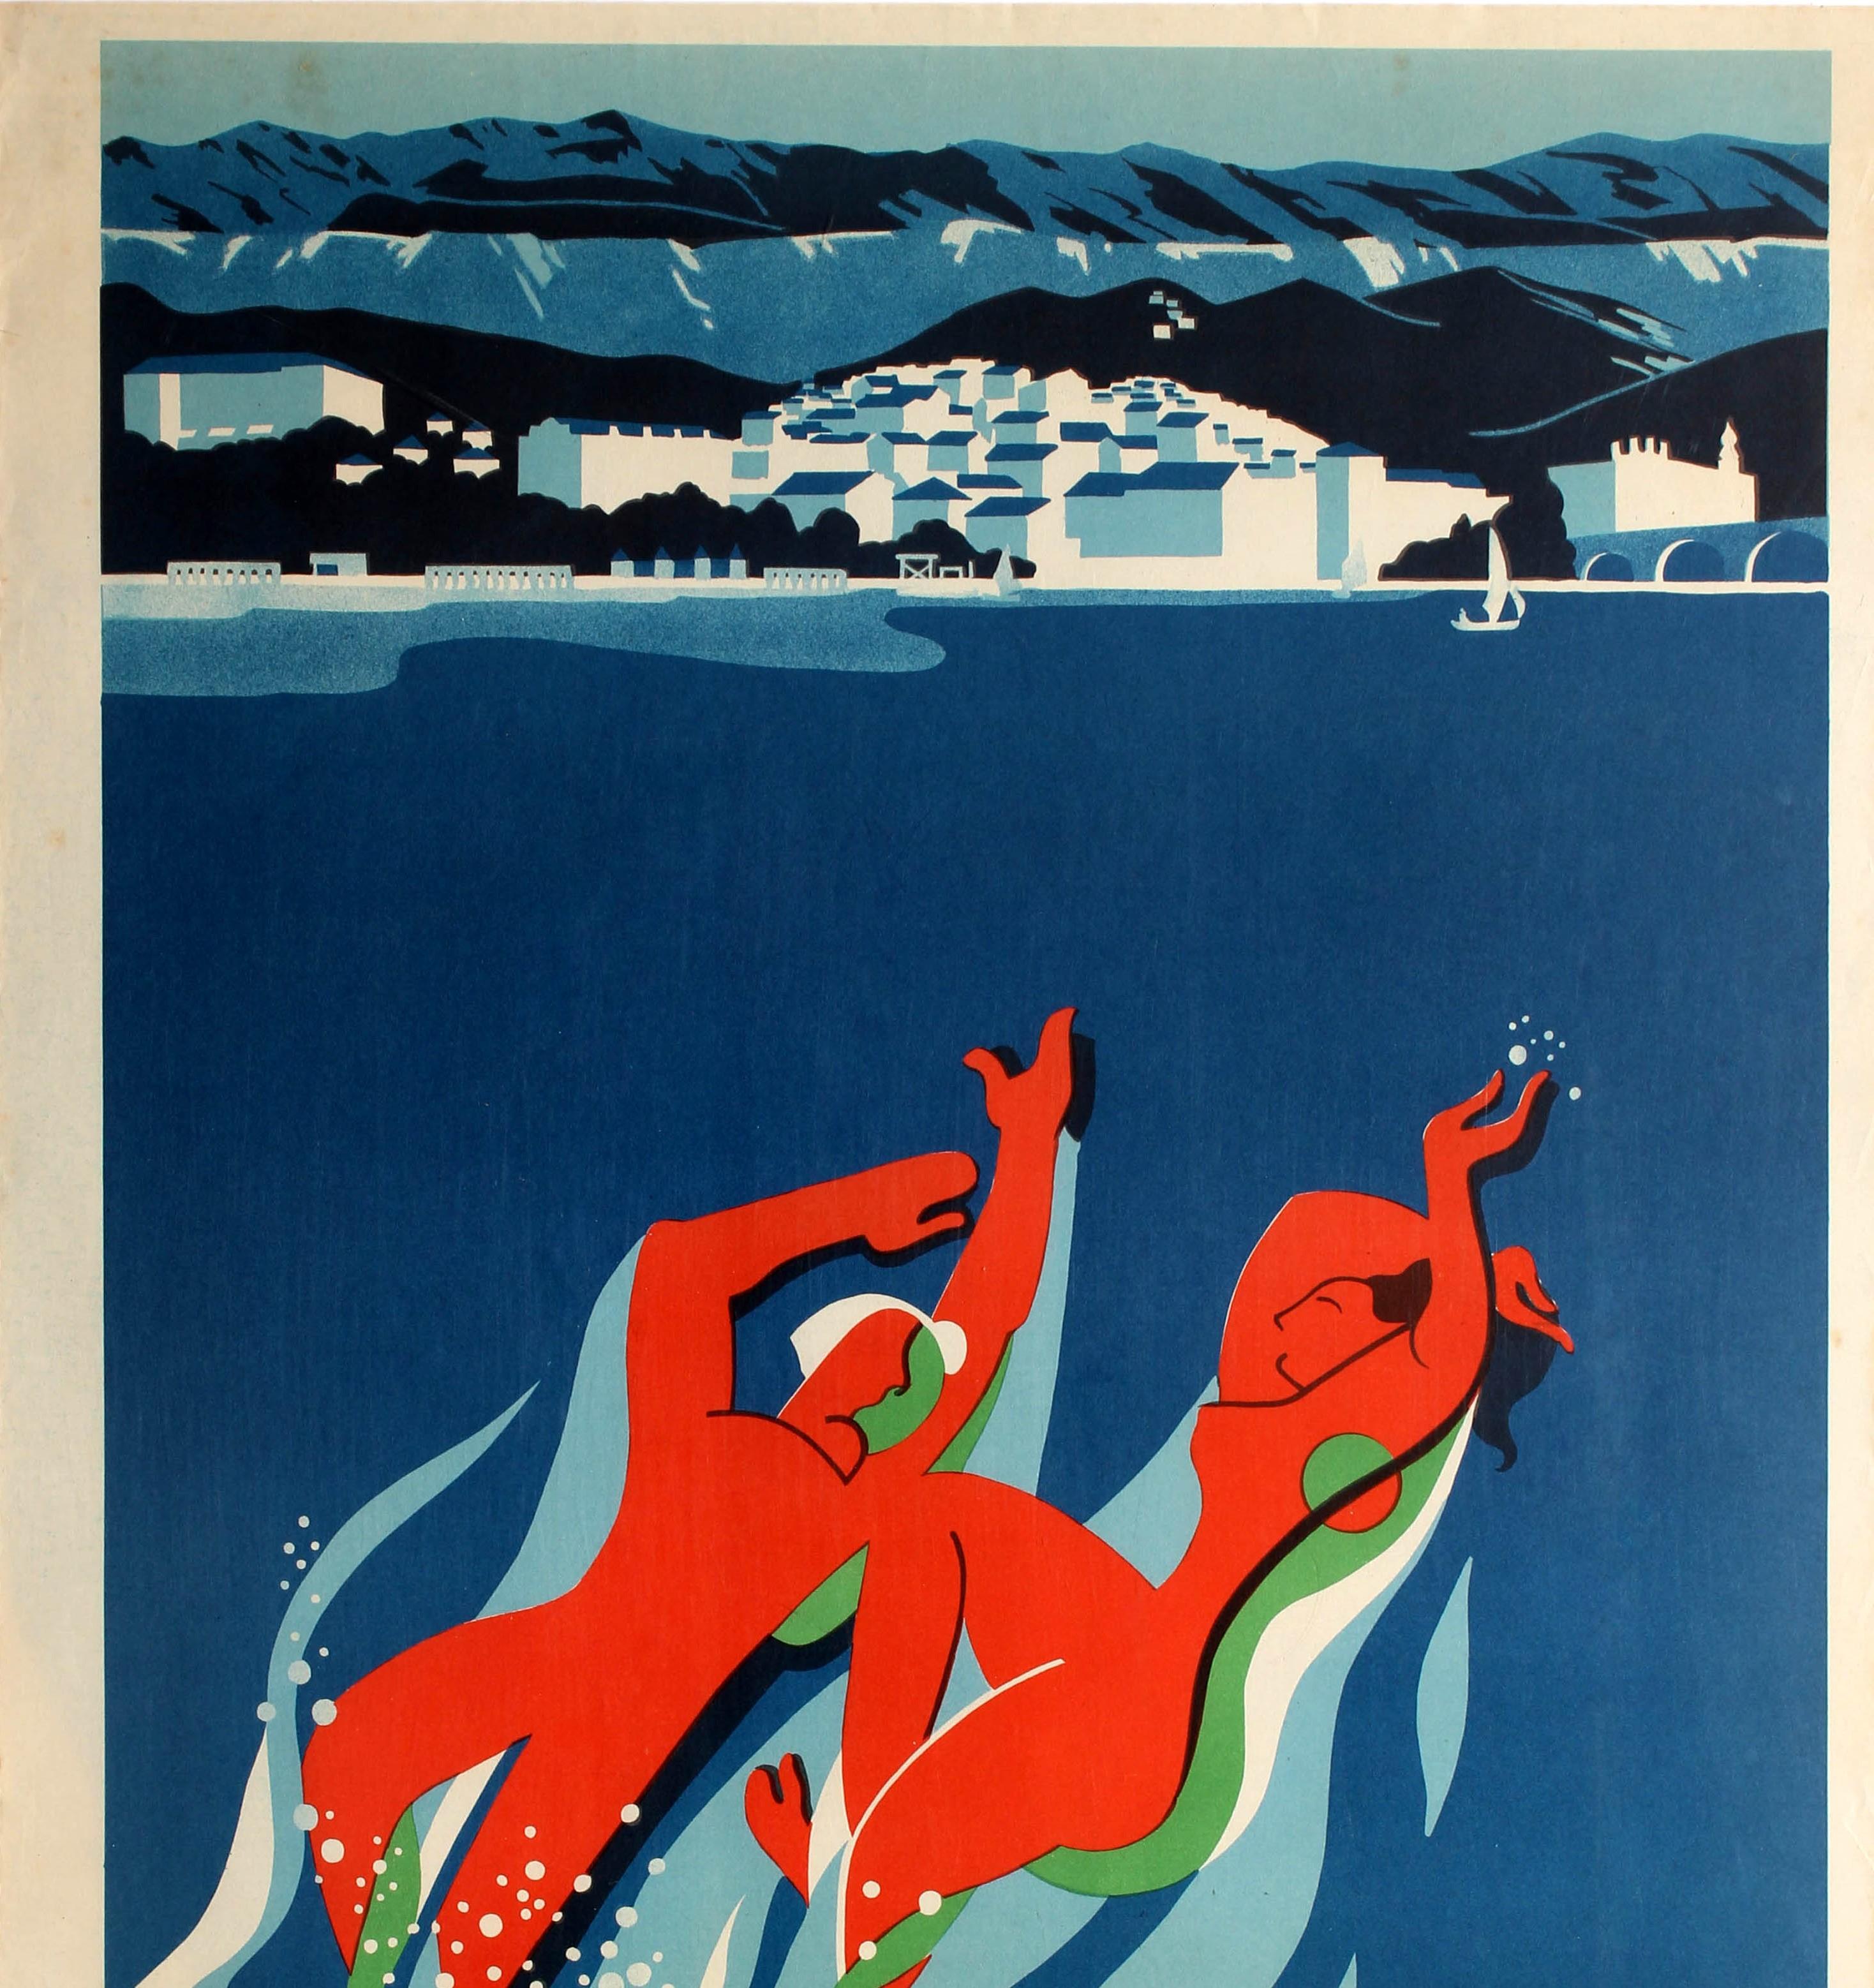 Original vintage travel poster published in French to promote the historic port and health spa resort of Crikvenica on the Vinodol coast in the Kvarner region (previously part of Yugoslavia and now part of Croatia) featuring a colourful stylised